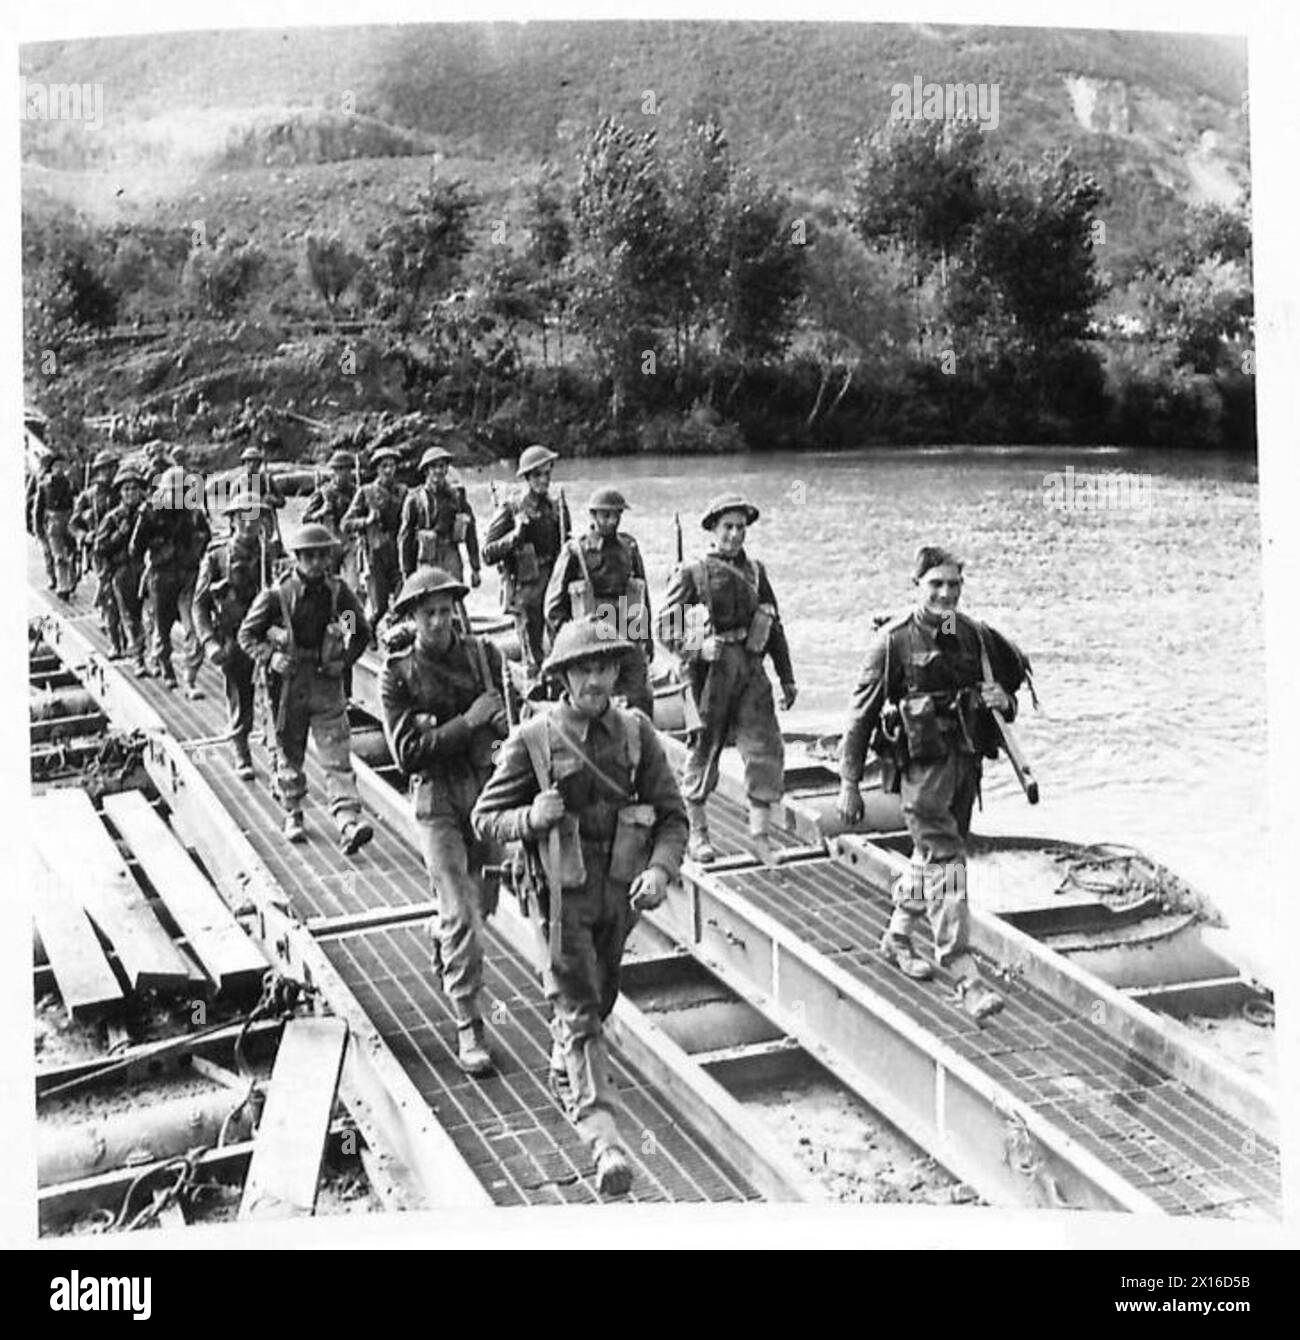 CROSSING OF THE RIVER VOLTURNO - Guards crossing a bridge over the River Volturno built by American engineers British Army Stock Photo